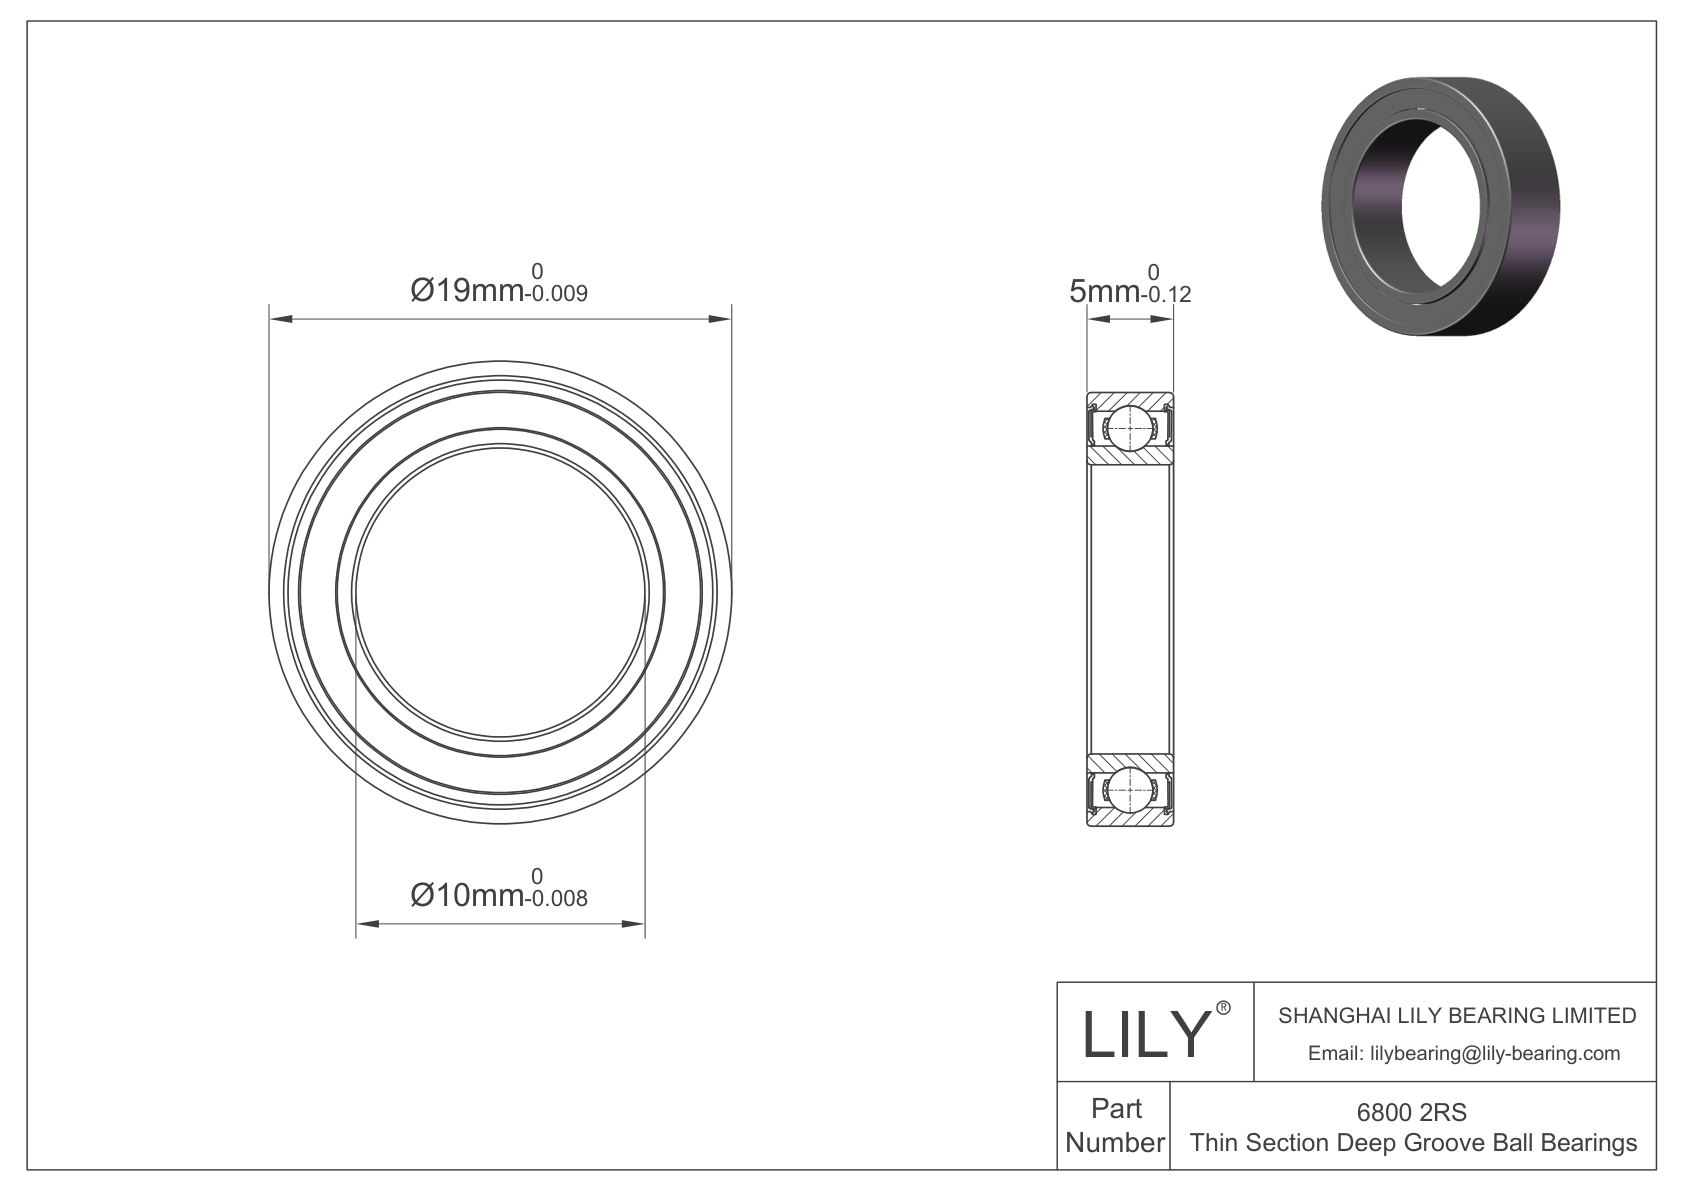 LILY-PUT680040-30 Outsourcing Polyurethane bearings cad drawing